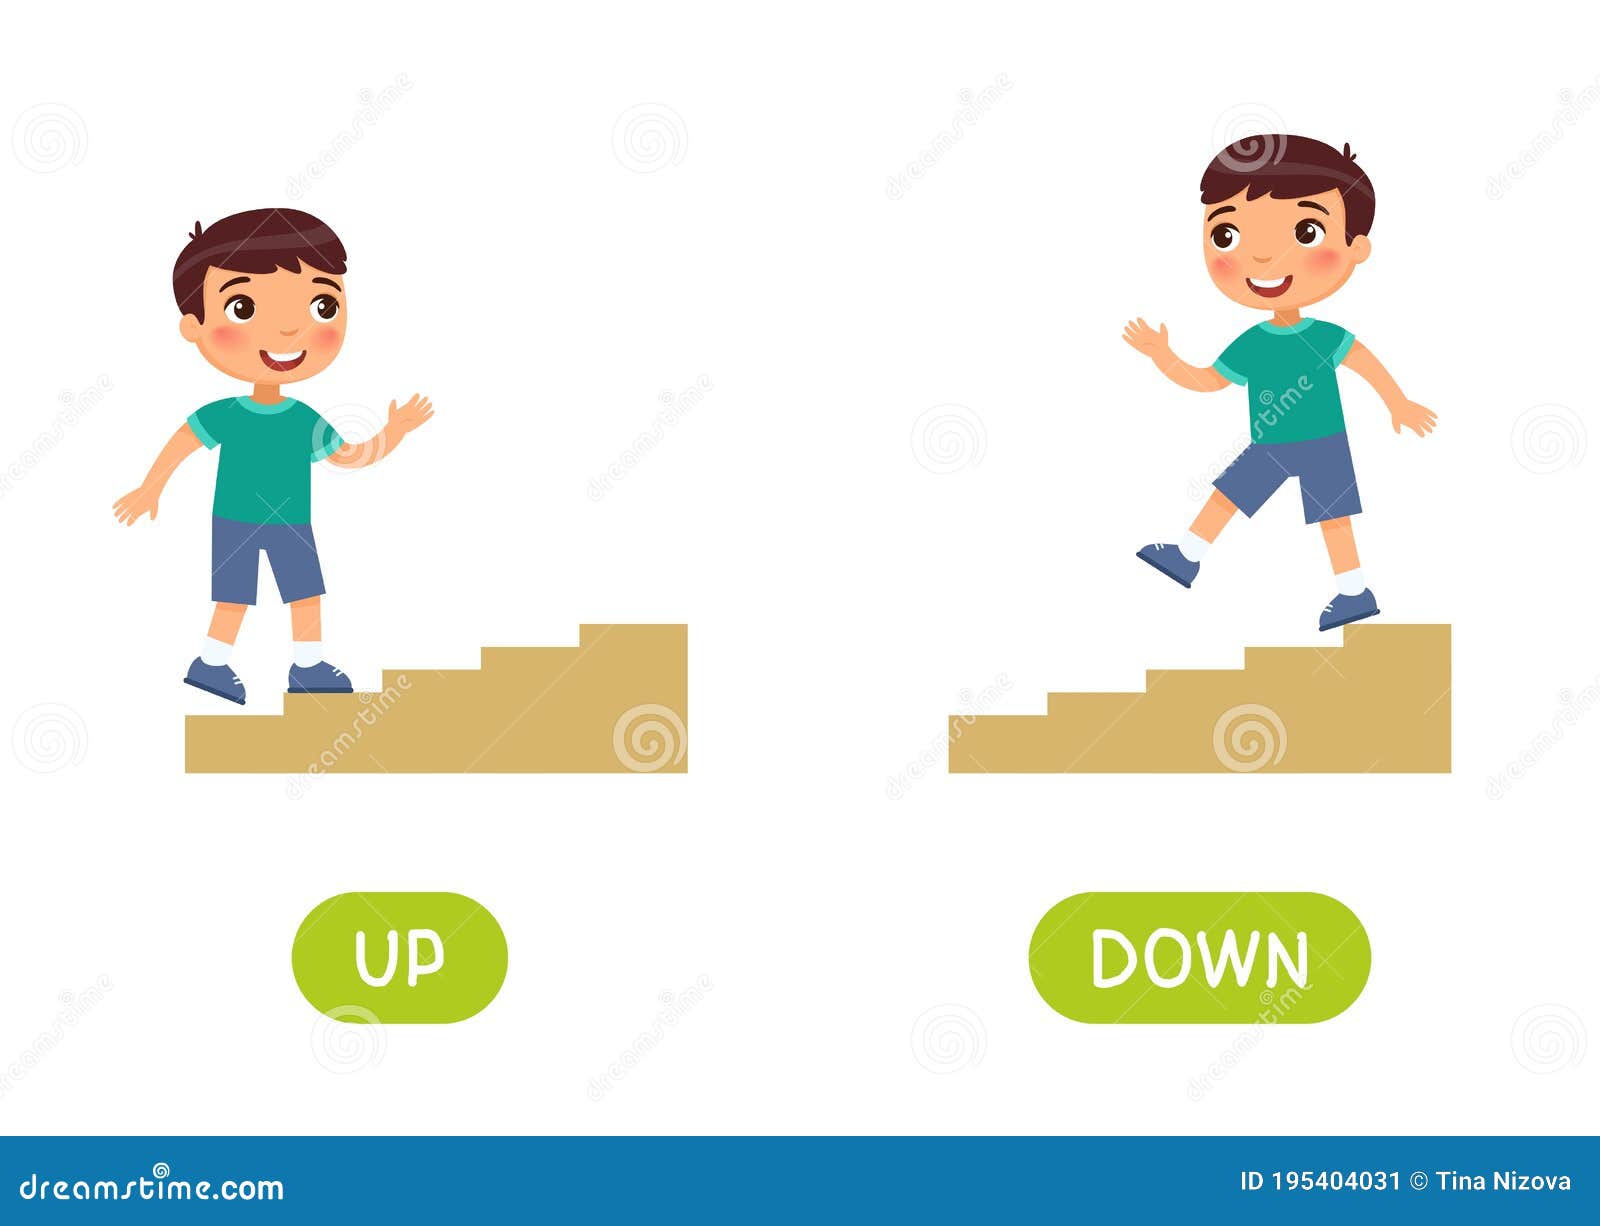 Go up сайт. Go up down. Вверх-вниз (up-down). Up and down Flashcards. Up down картинка для детей.